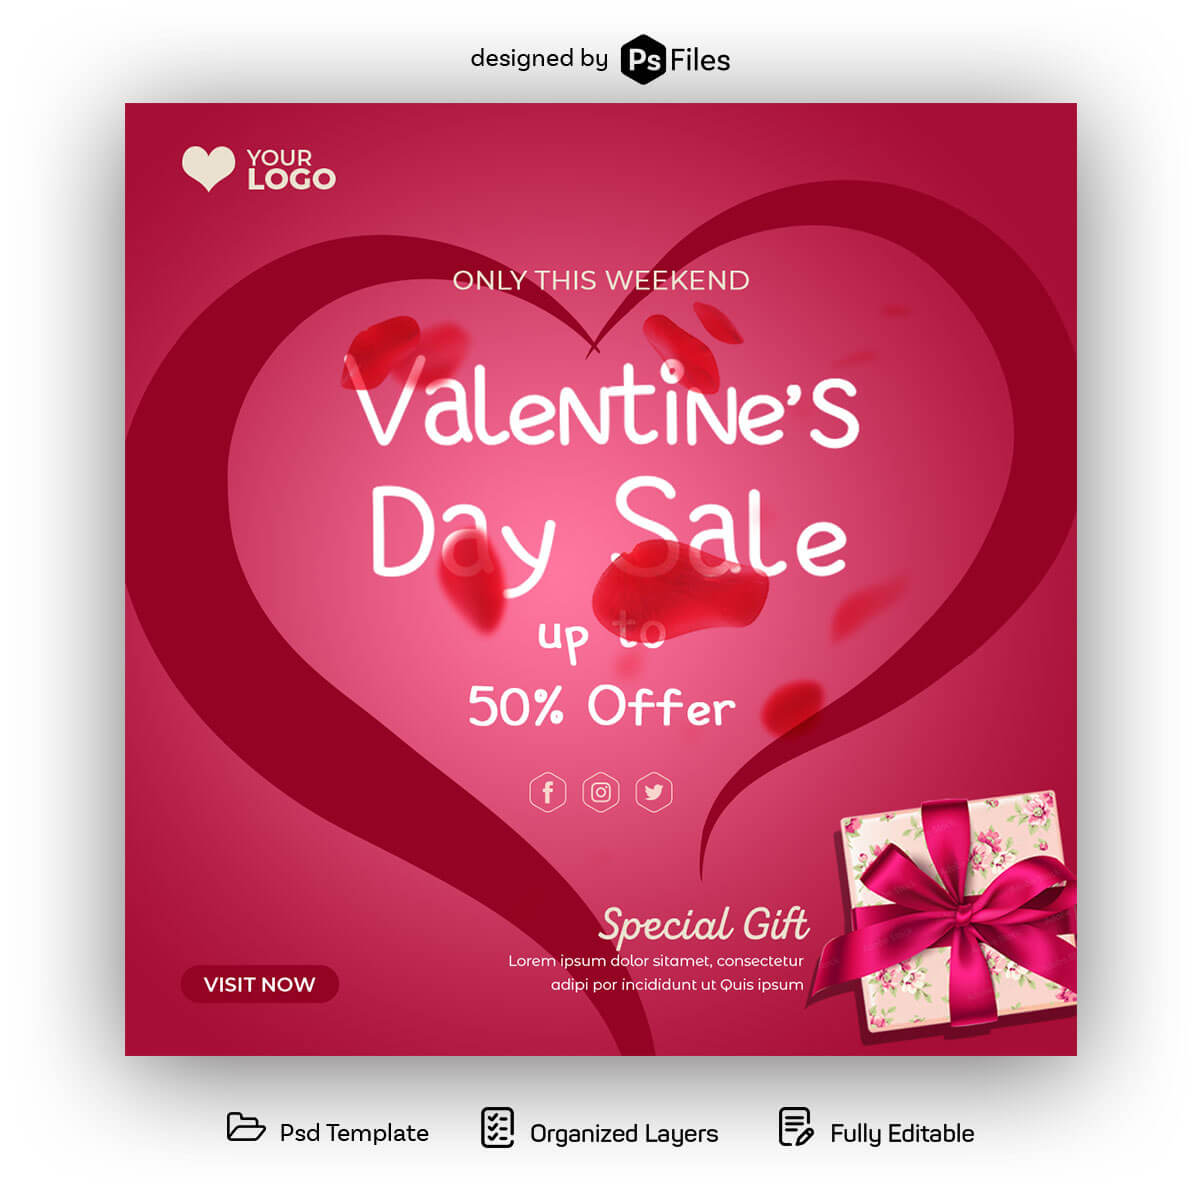 PsFIles Valentines Day Special Offer Sale Post Design Free PSD file_View